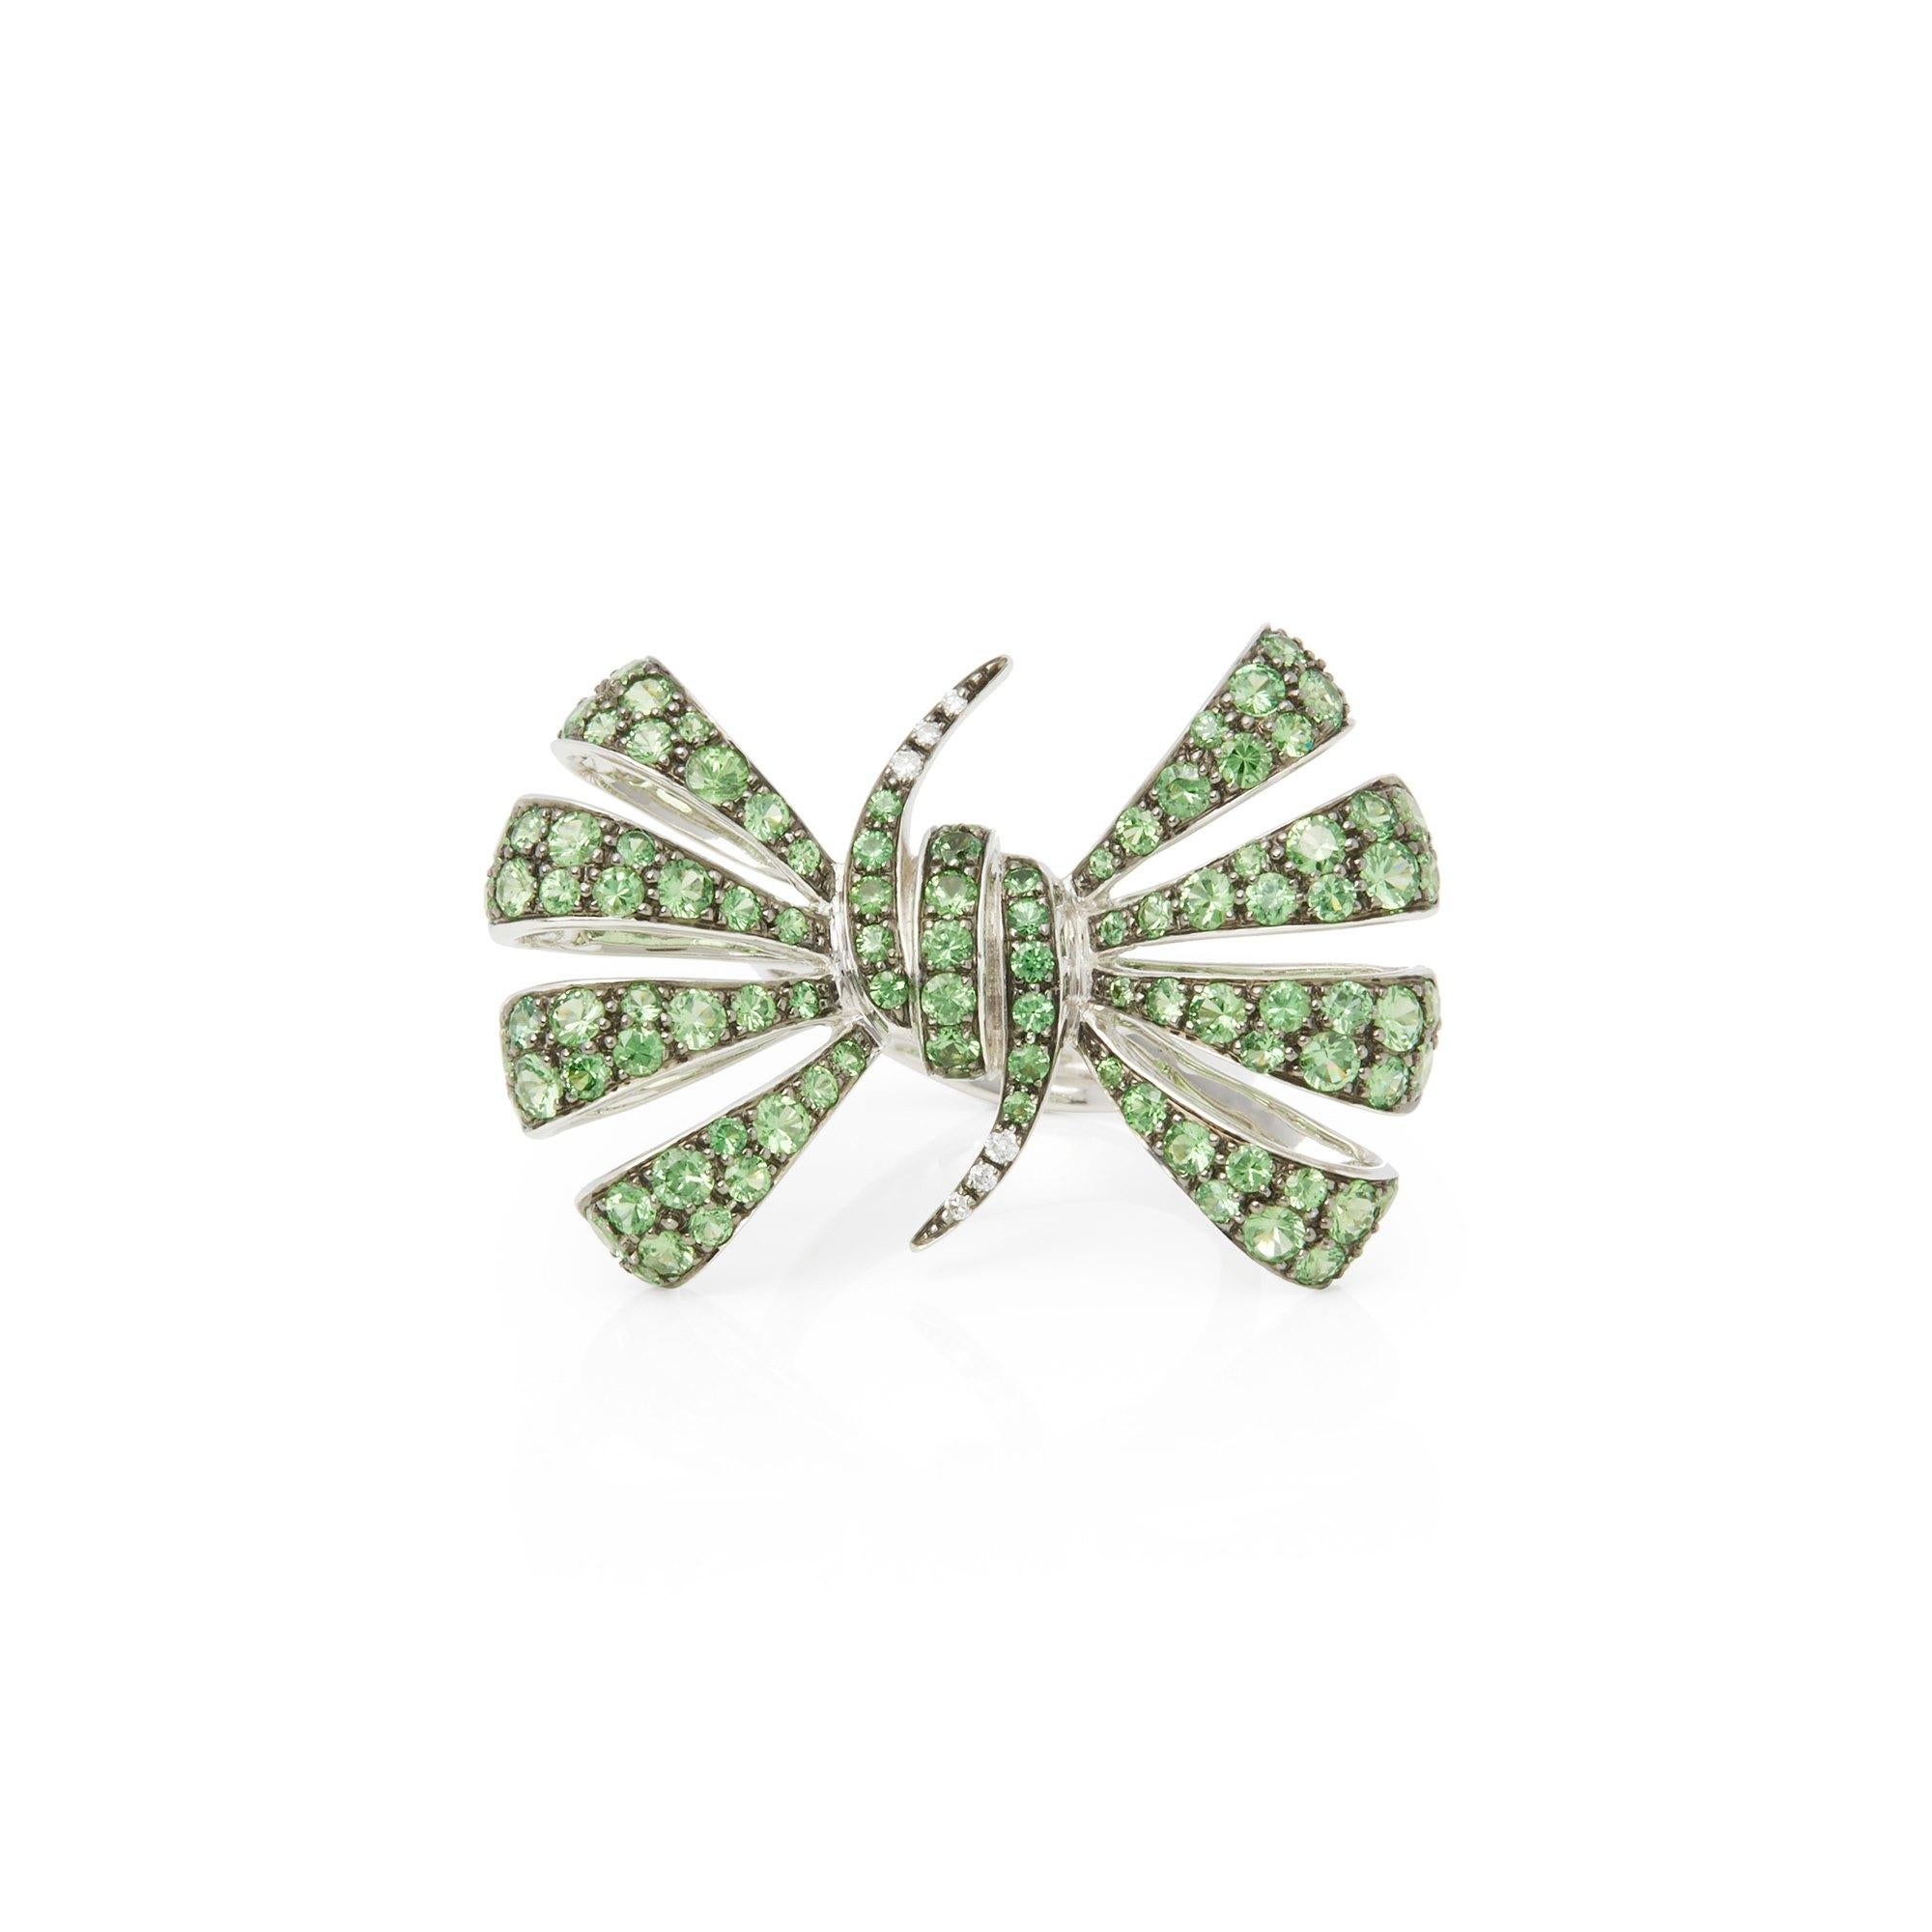 This ring by Stephen Webster is from his Forget me Not collection and features pave set tsavorite stones. Set in 18k white gold with signature designed band. 